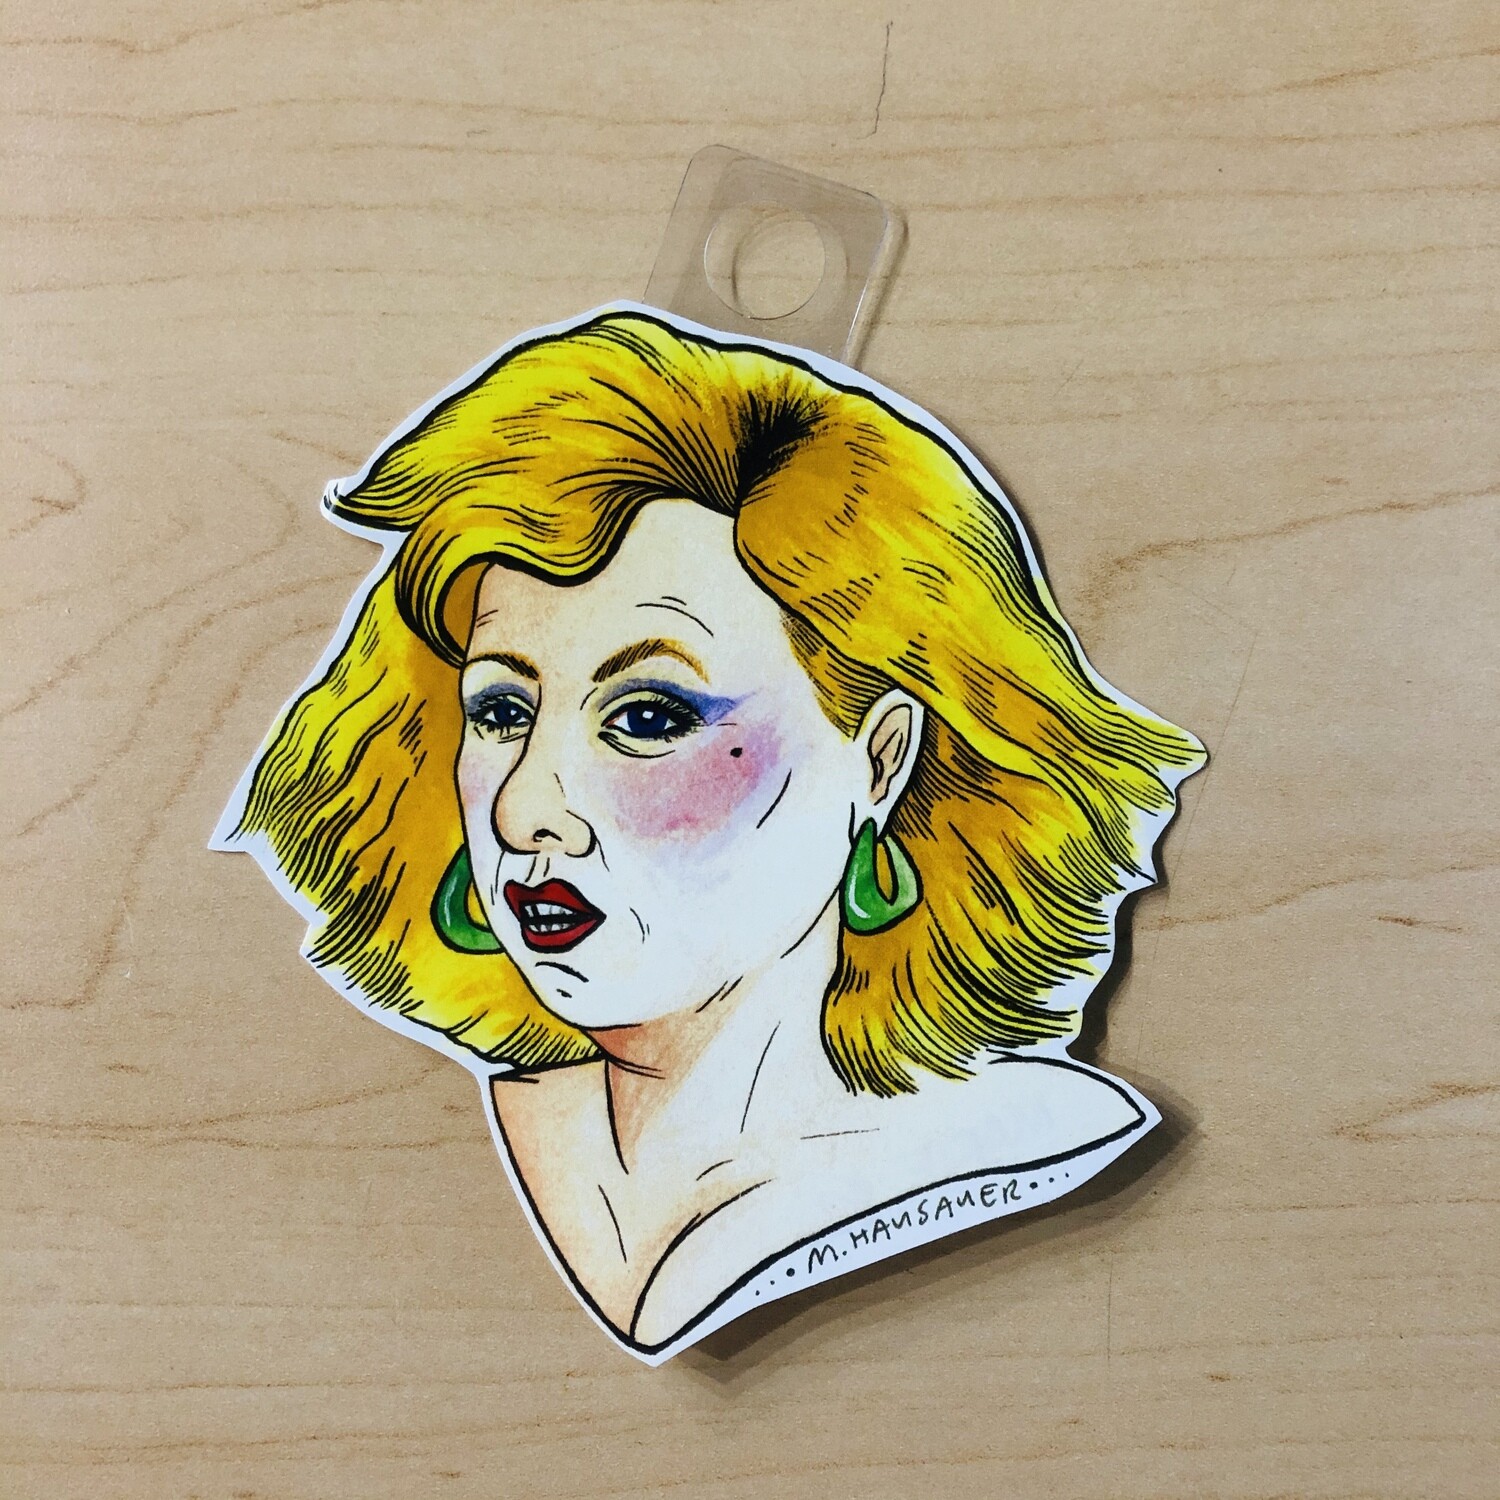 Blonde Woman Bust - Sticker by Marie Bouassi